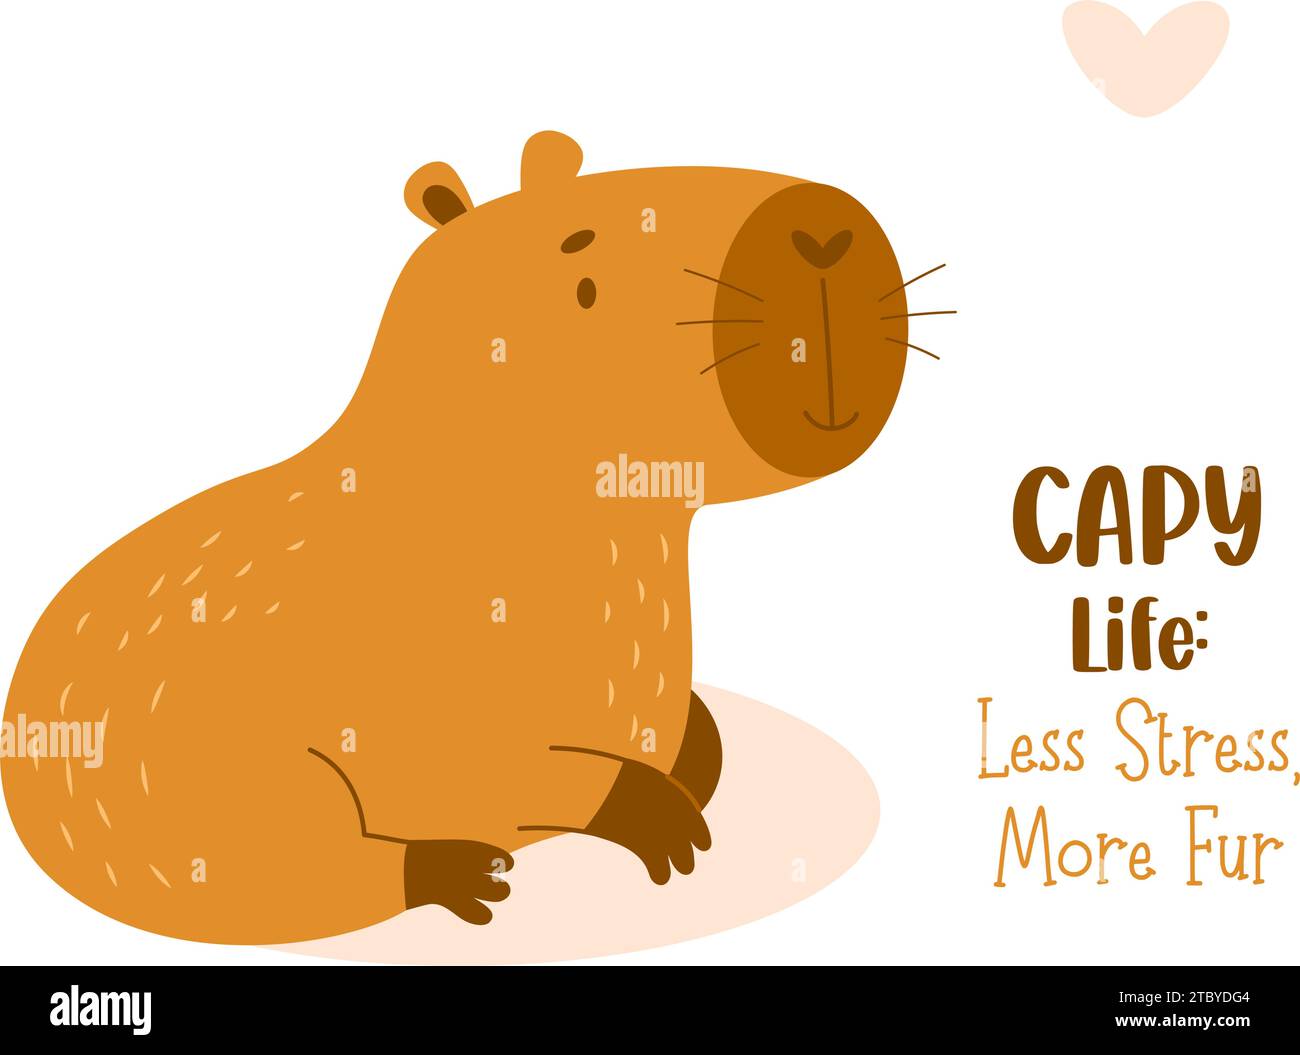 Cute capybara animal rodent postcard. Vector illustration in flat style for cards, design, t-shirt design, print, kids collection Stock Vector